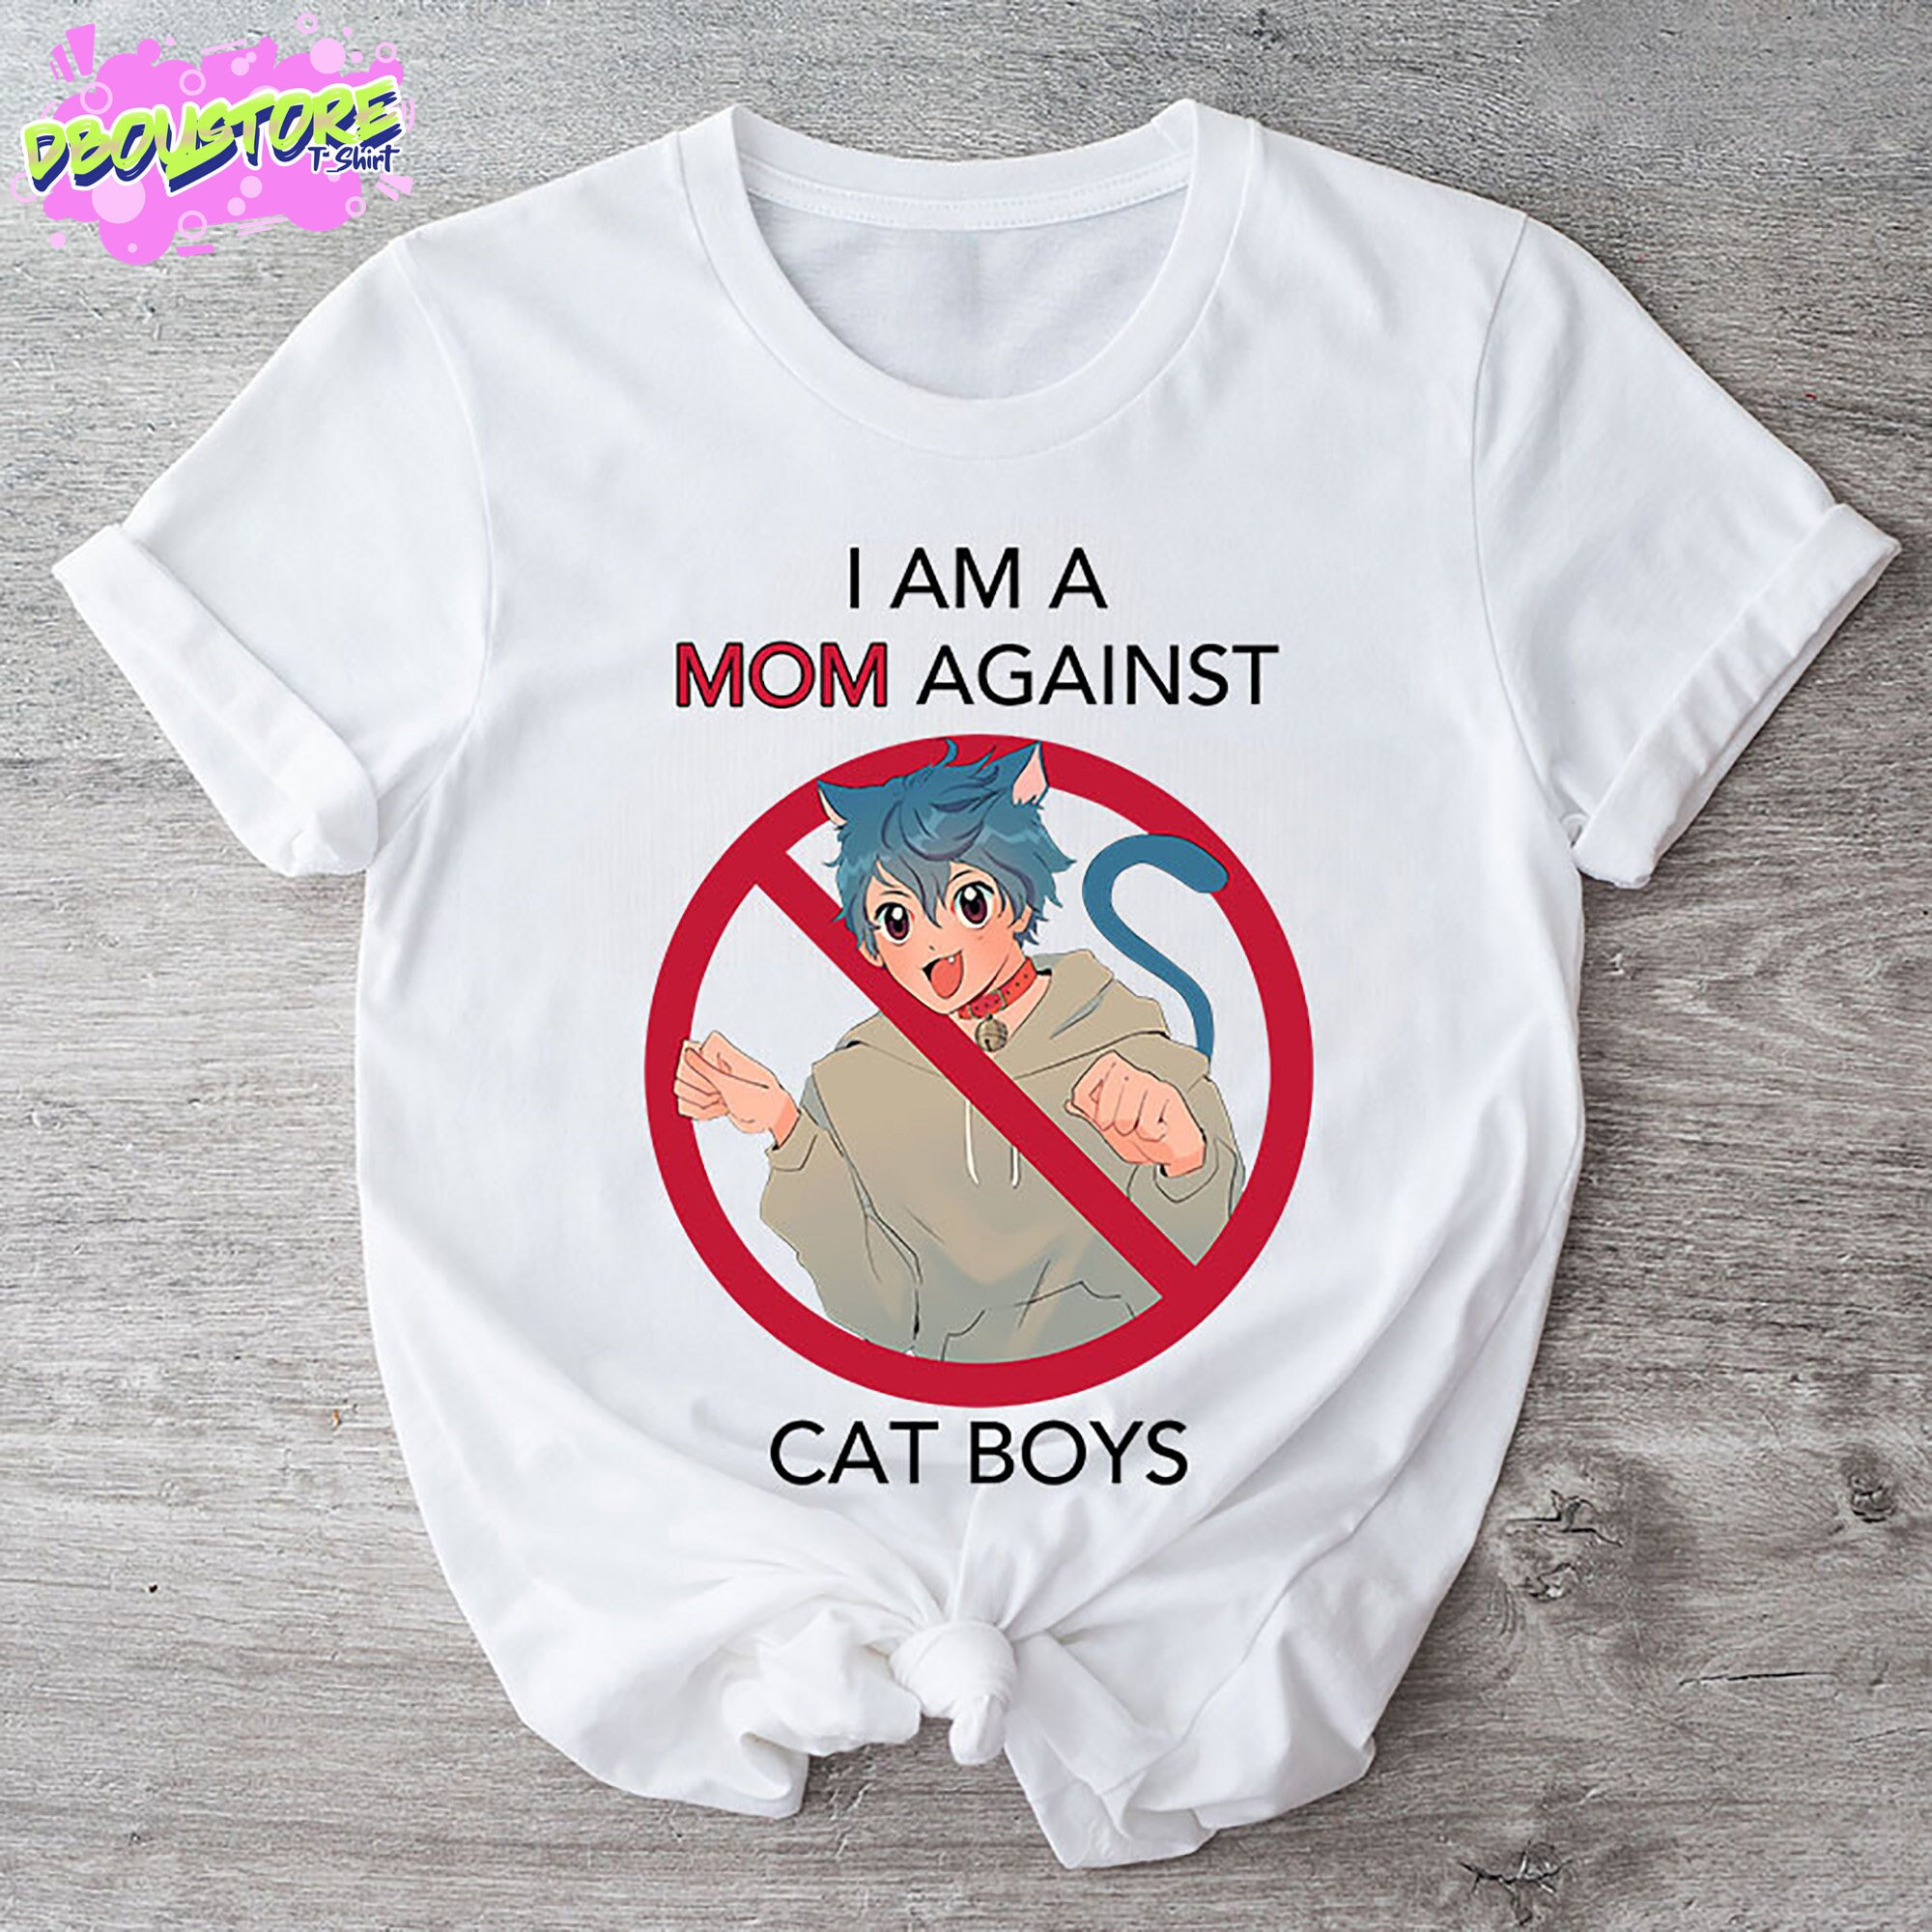 I Am a Mom Against Cat Girls Sticker for Sale by Designby Eve